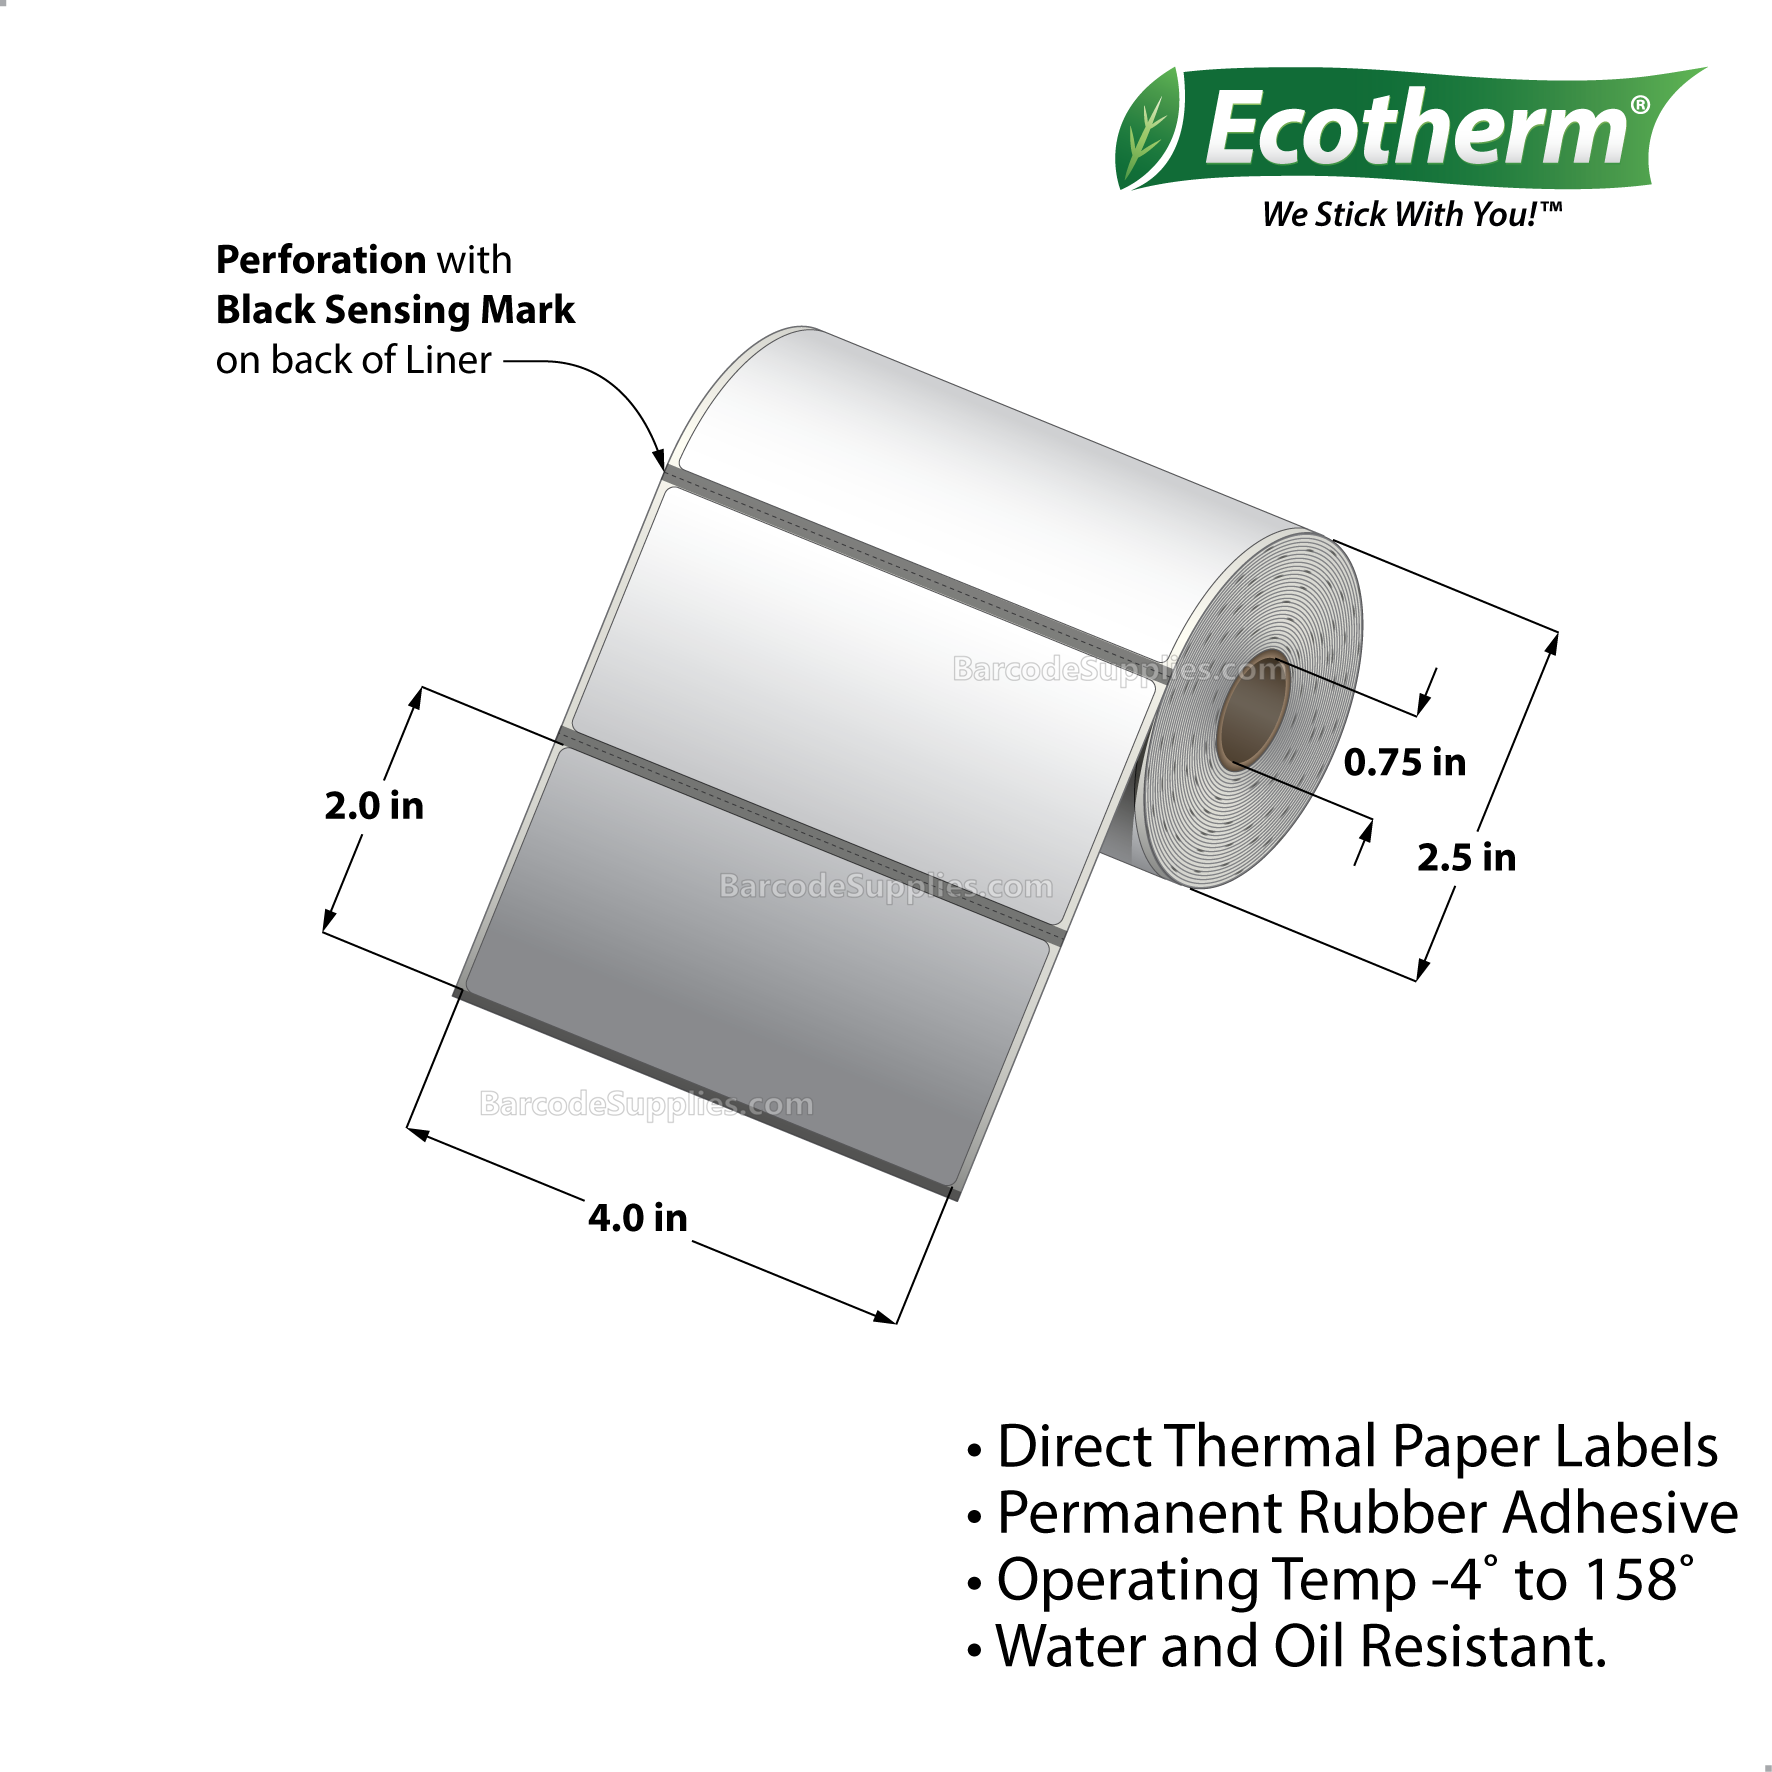 4 x 2 Direct Thermal White Labels With Rubber Adhesive - Perforated - 300 Labels Per Roll - Carton Of 25 Rolls - 7500 Labels Total - MPN: ECOTHERM13111-25